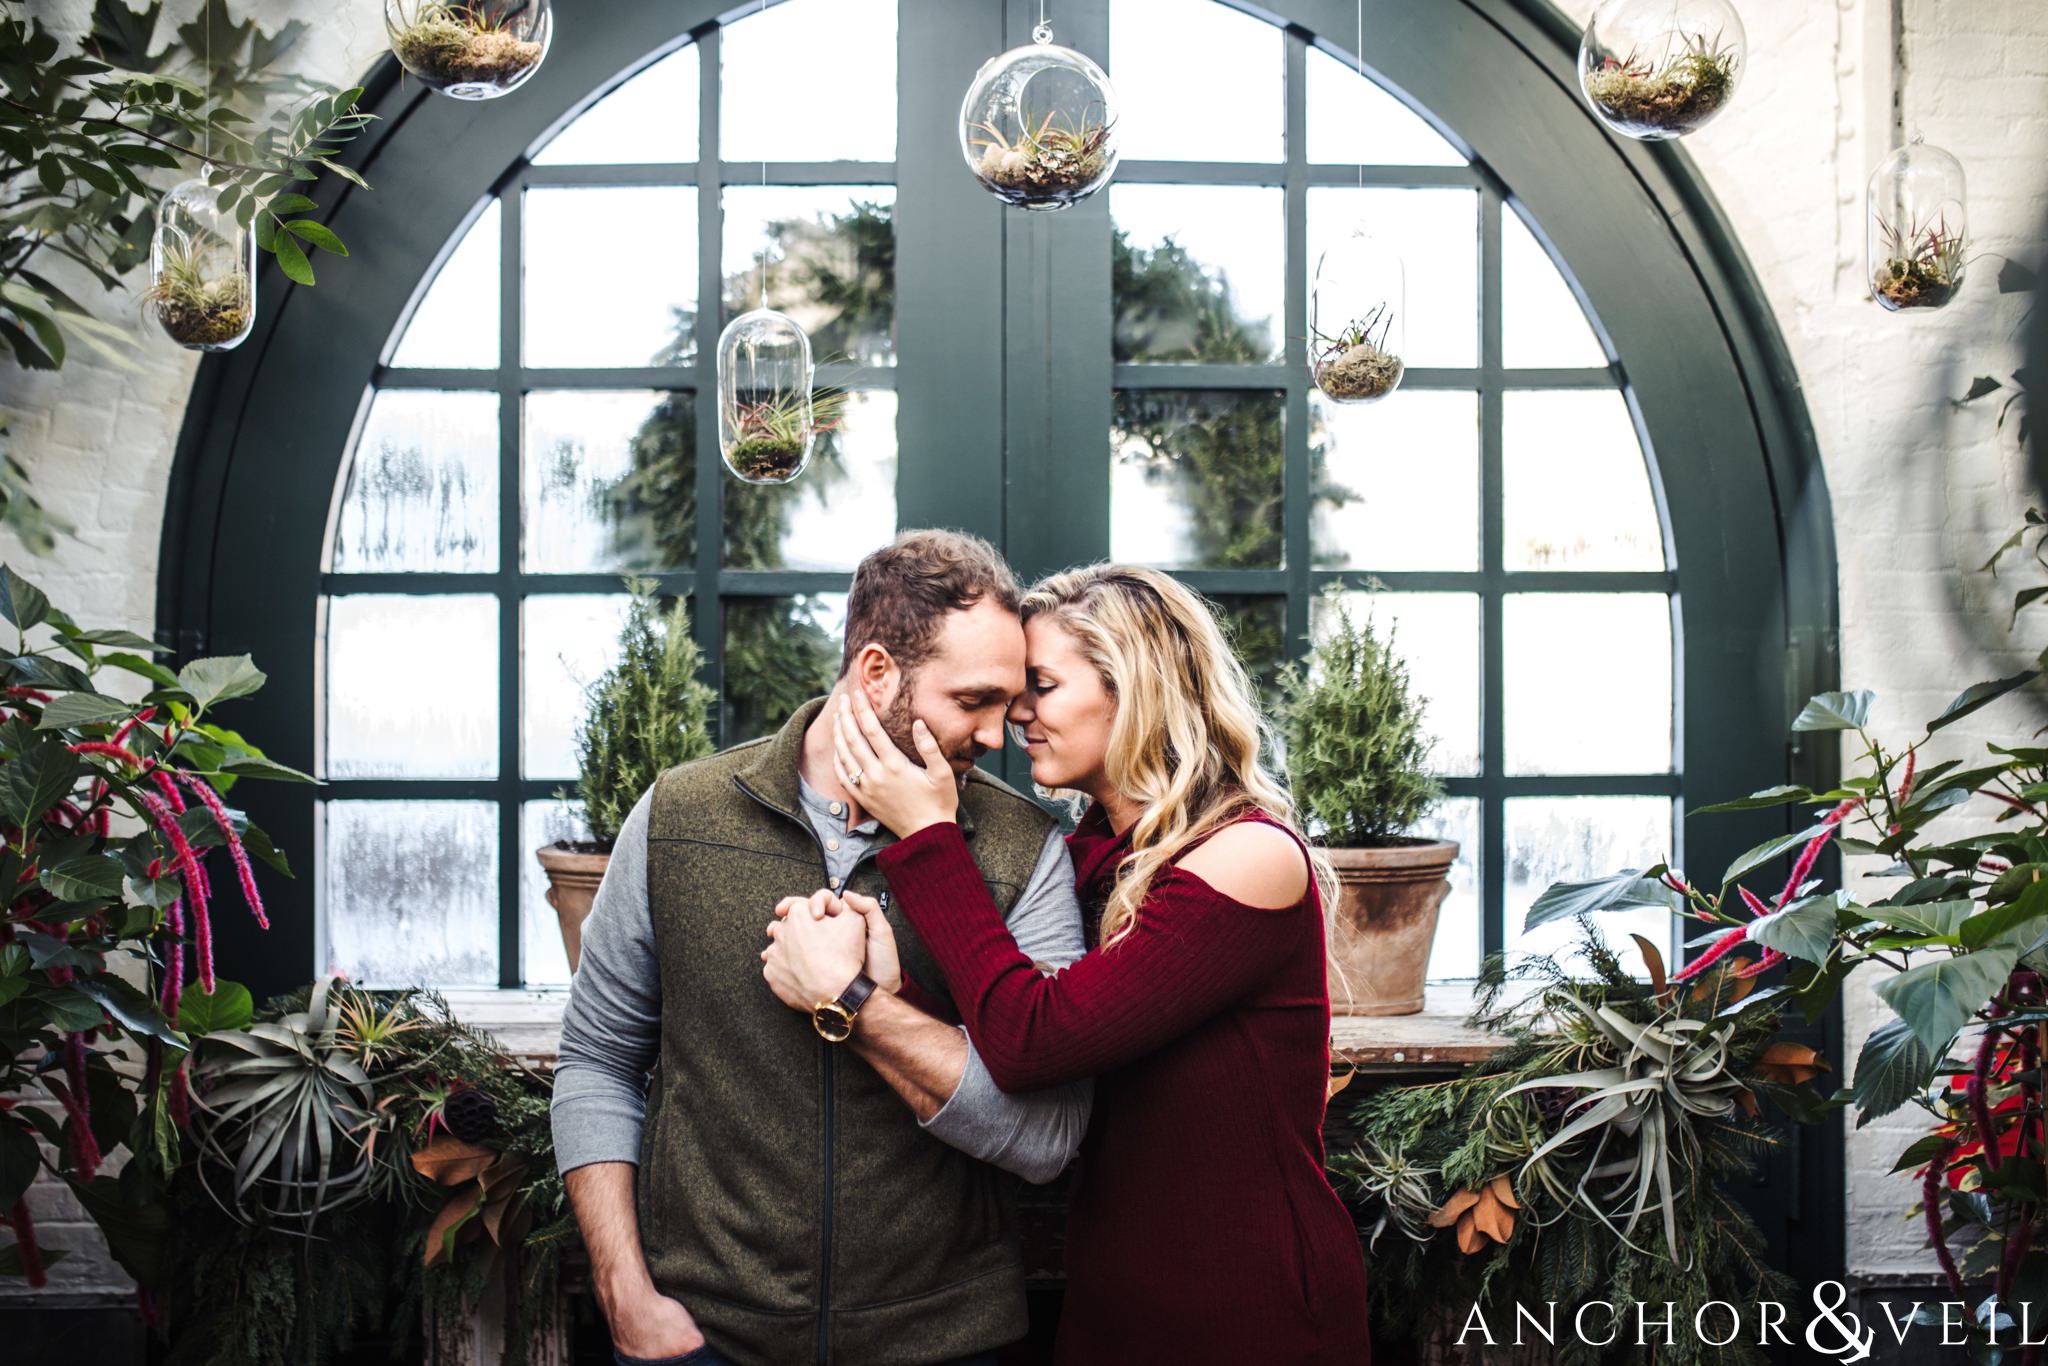 with the terrariums during their Snowy Biltmore Engagement Session